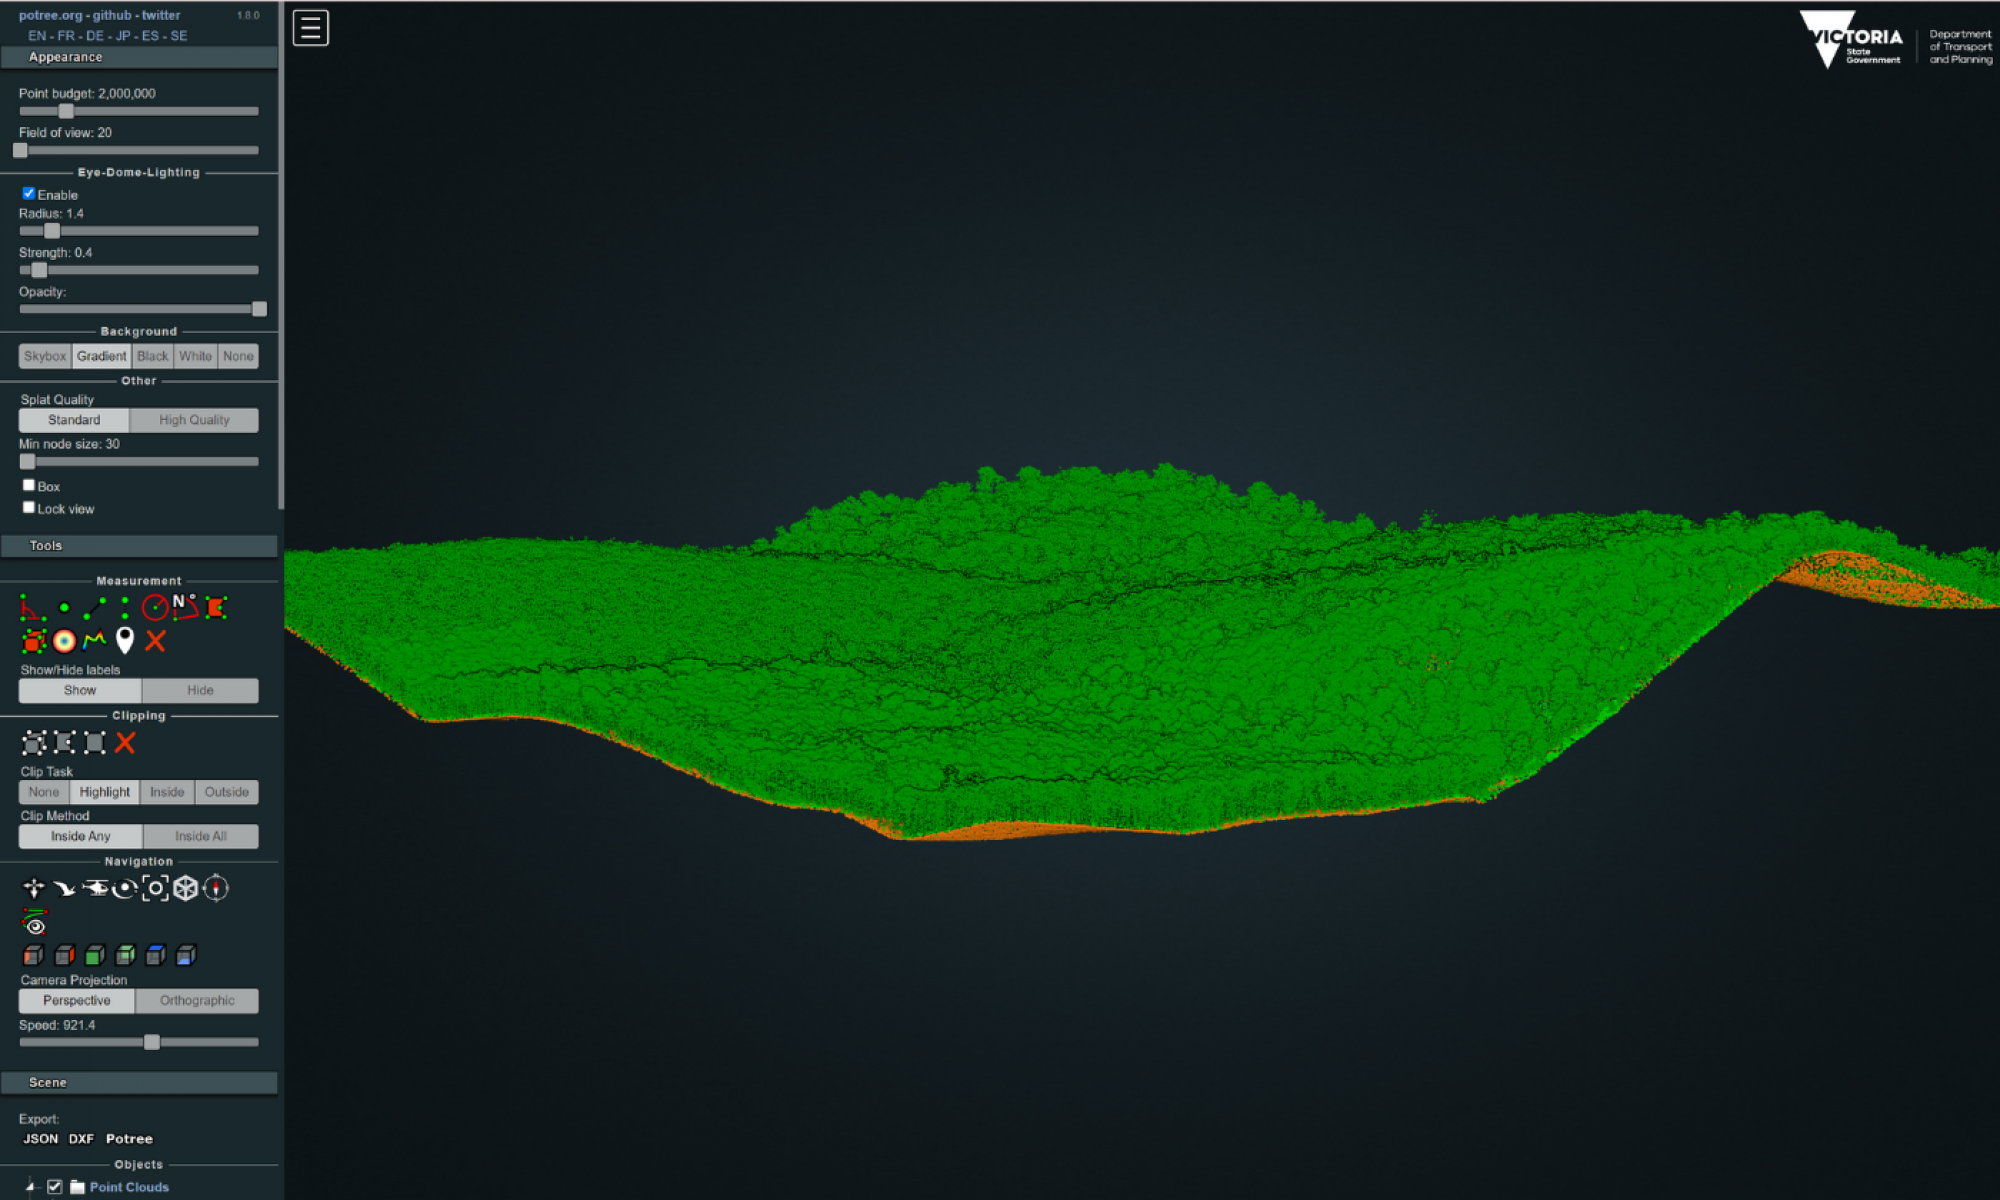 A LiDAR image showing terrain and tree coverage in East Gippsland. Ground cover is shown in orange and tree coverage in grey.